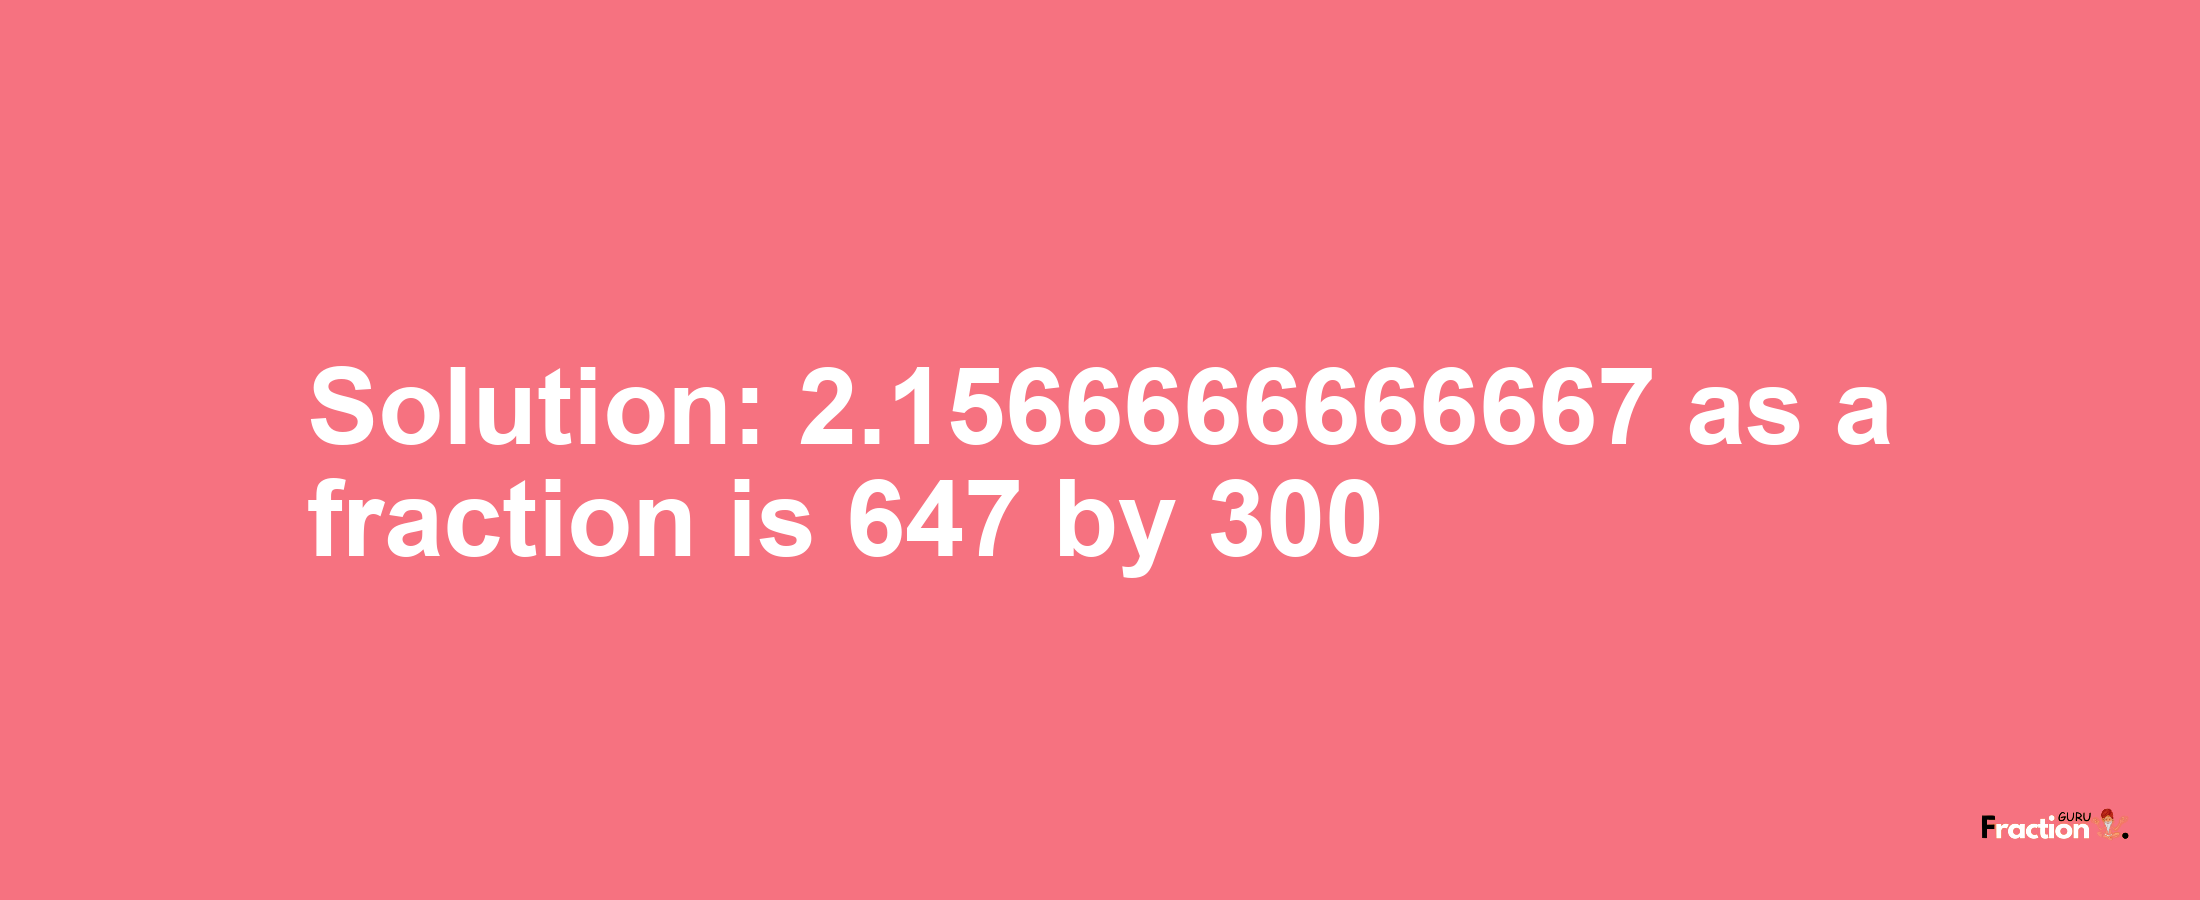 Solution:2.1566666666667 as a fraction is 647/300